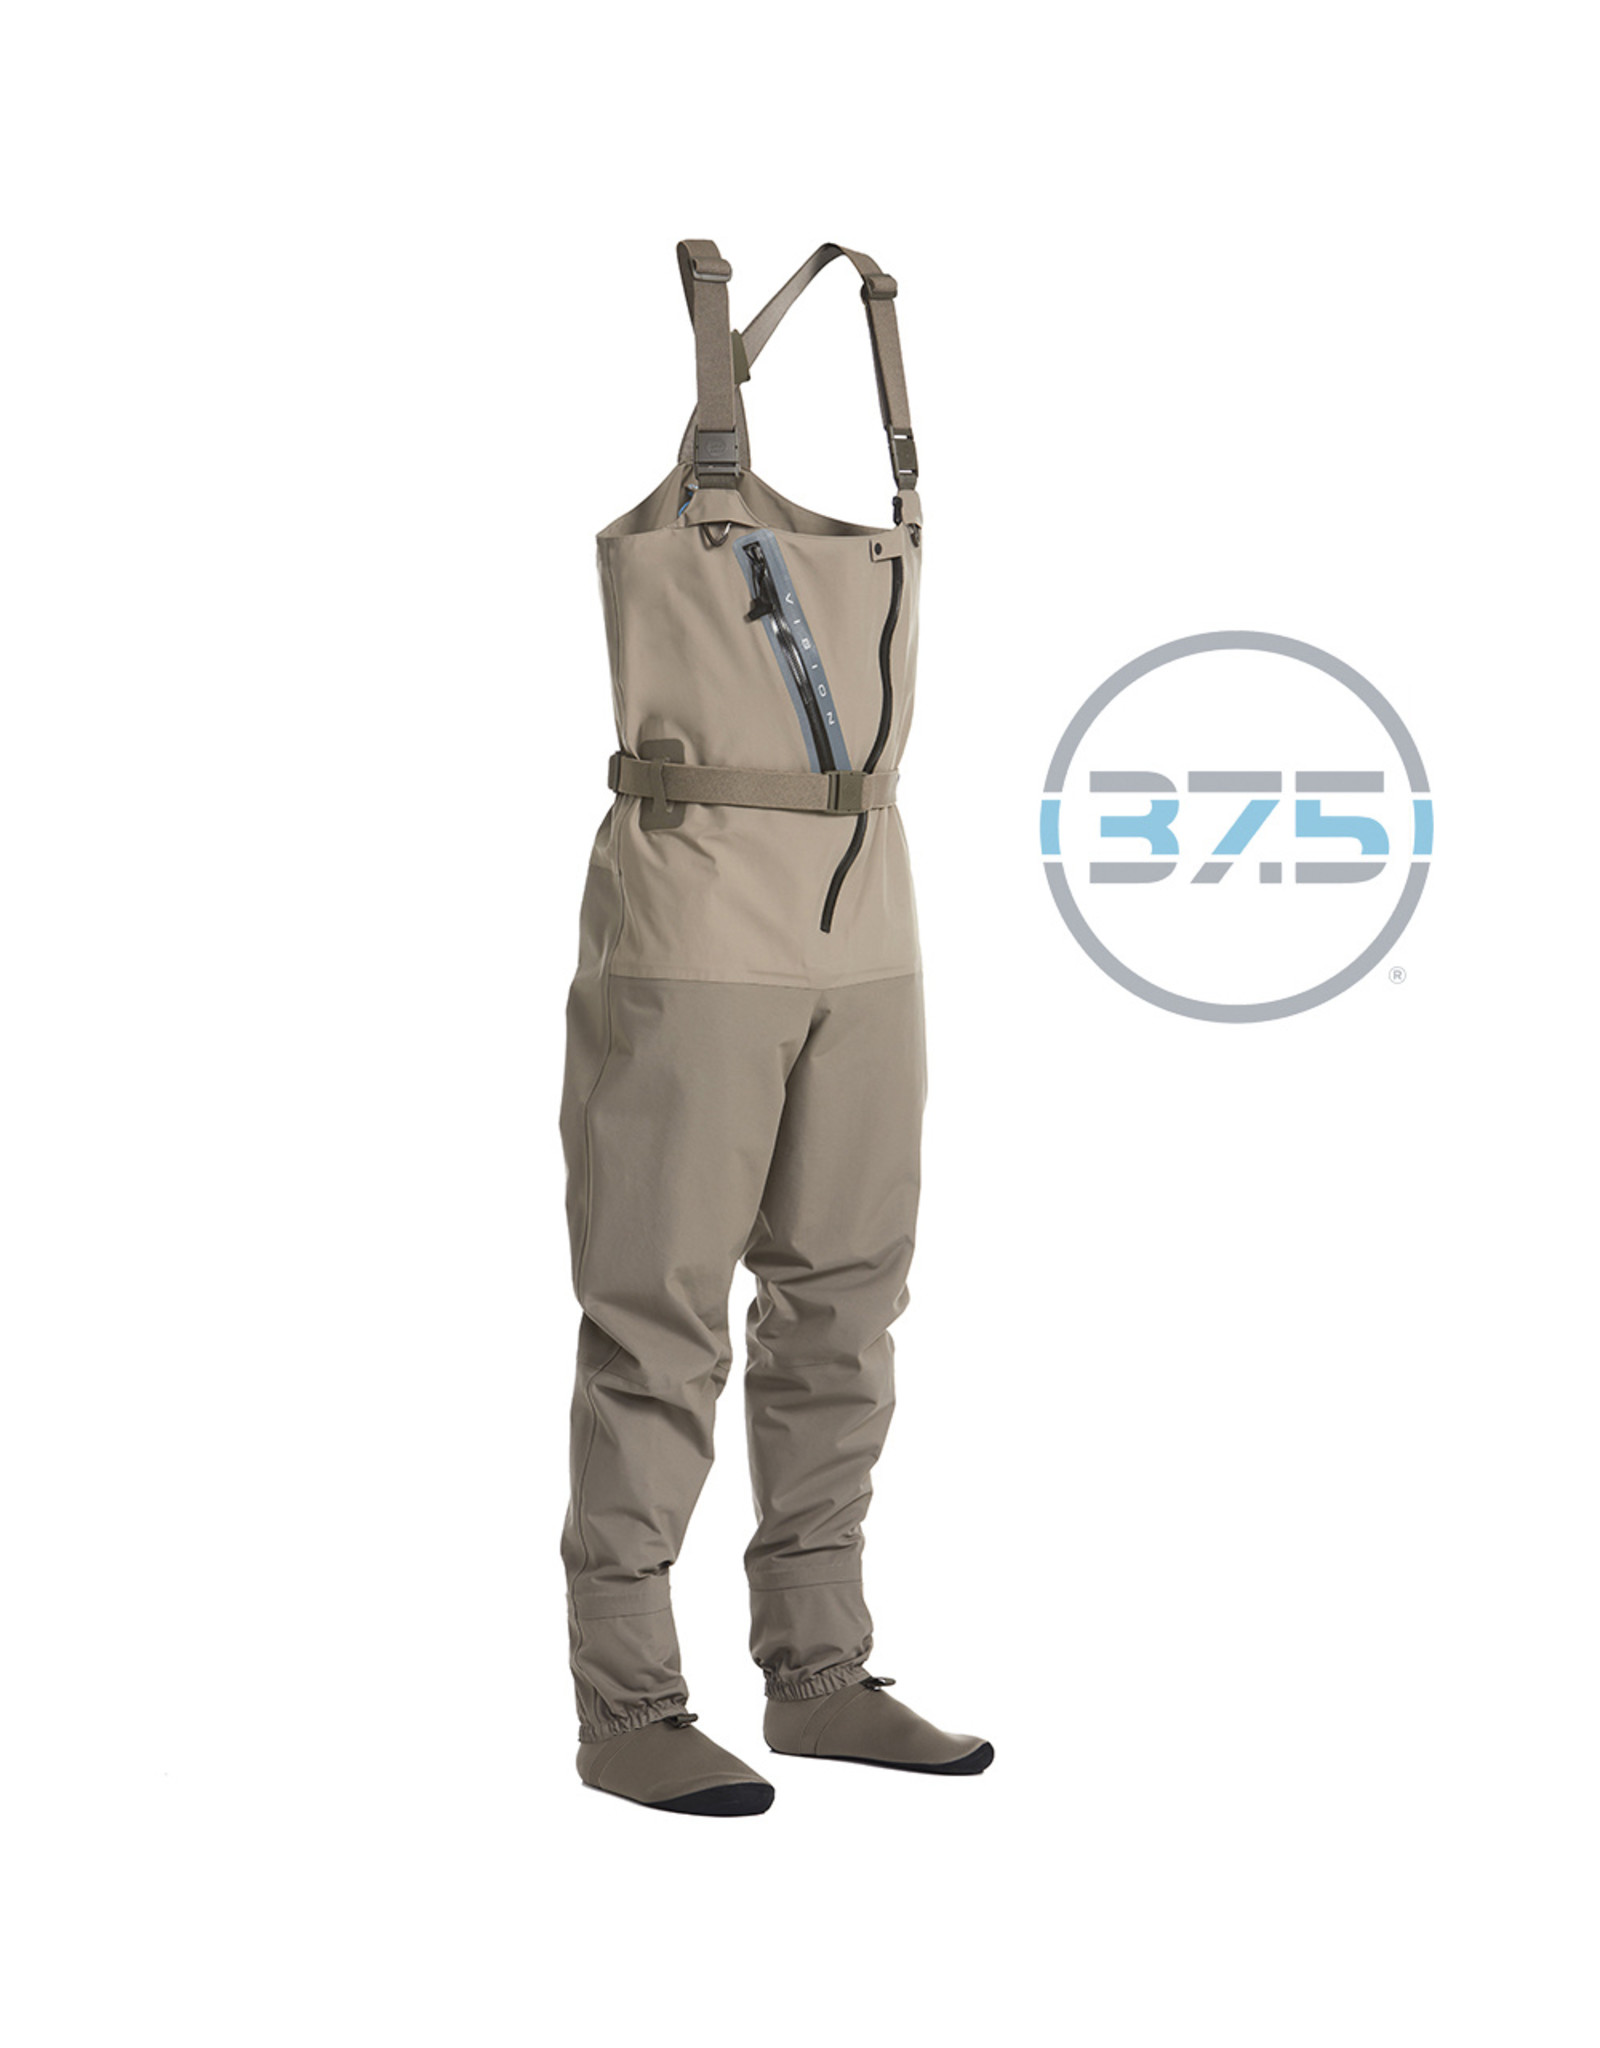 VISION FLY FISHING SCOUT 2.0 ZIP Stockingfoot Waders